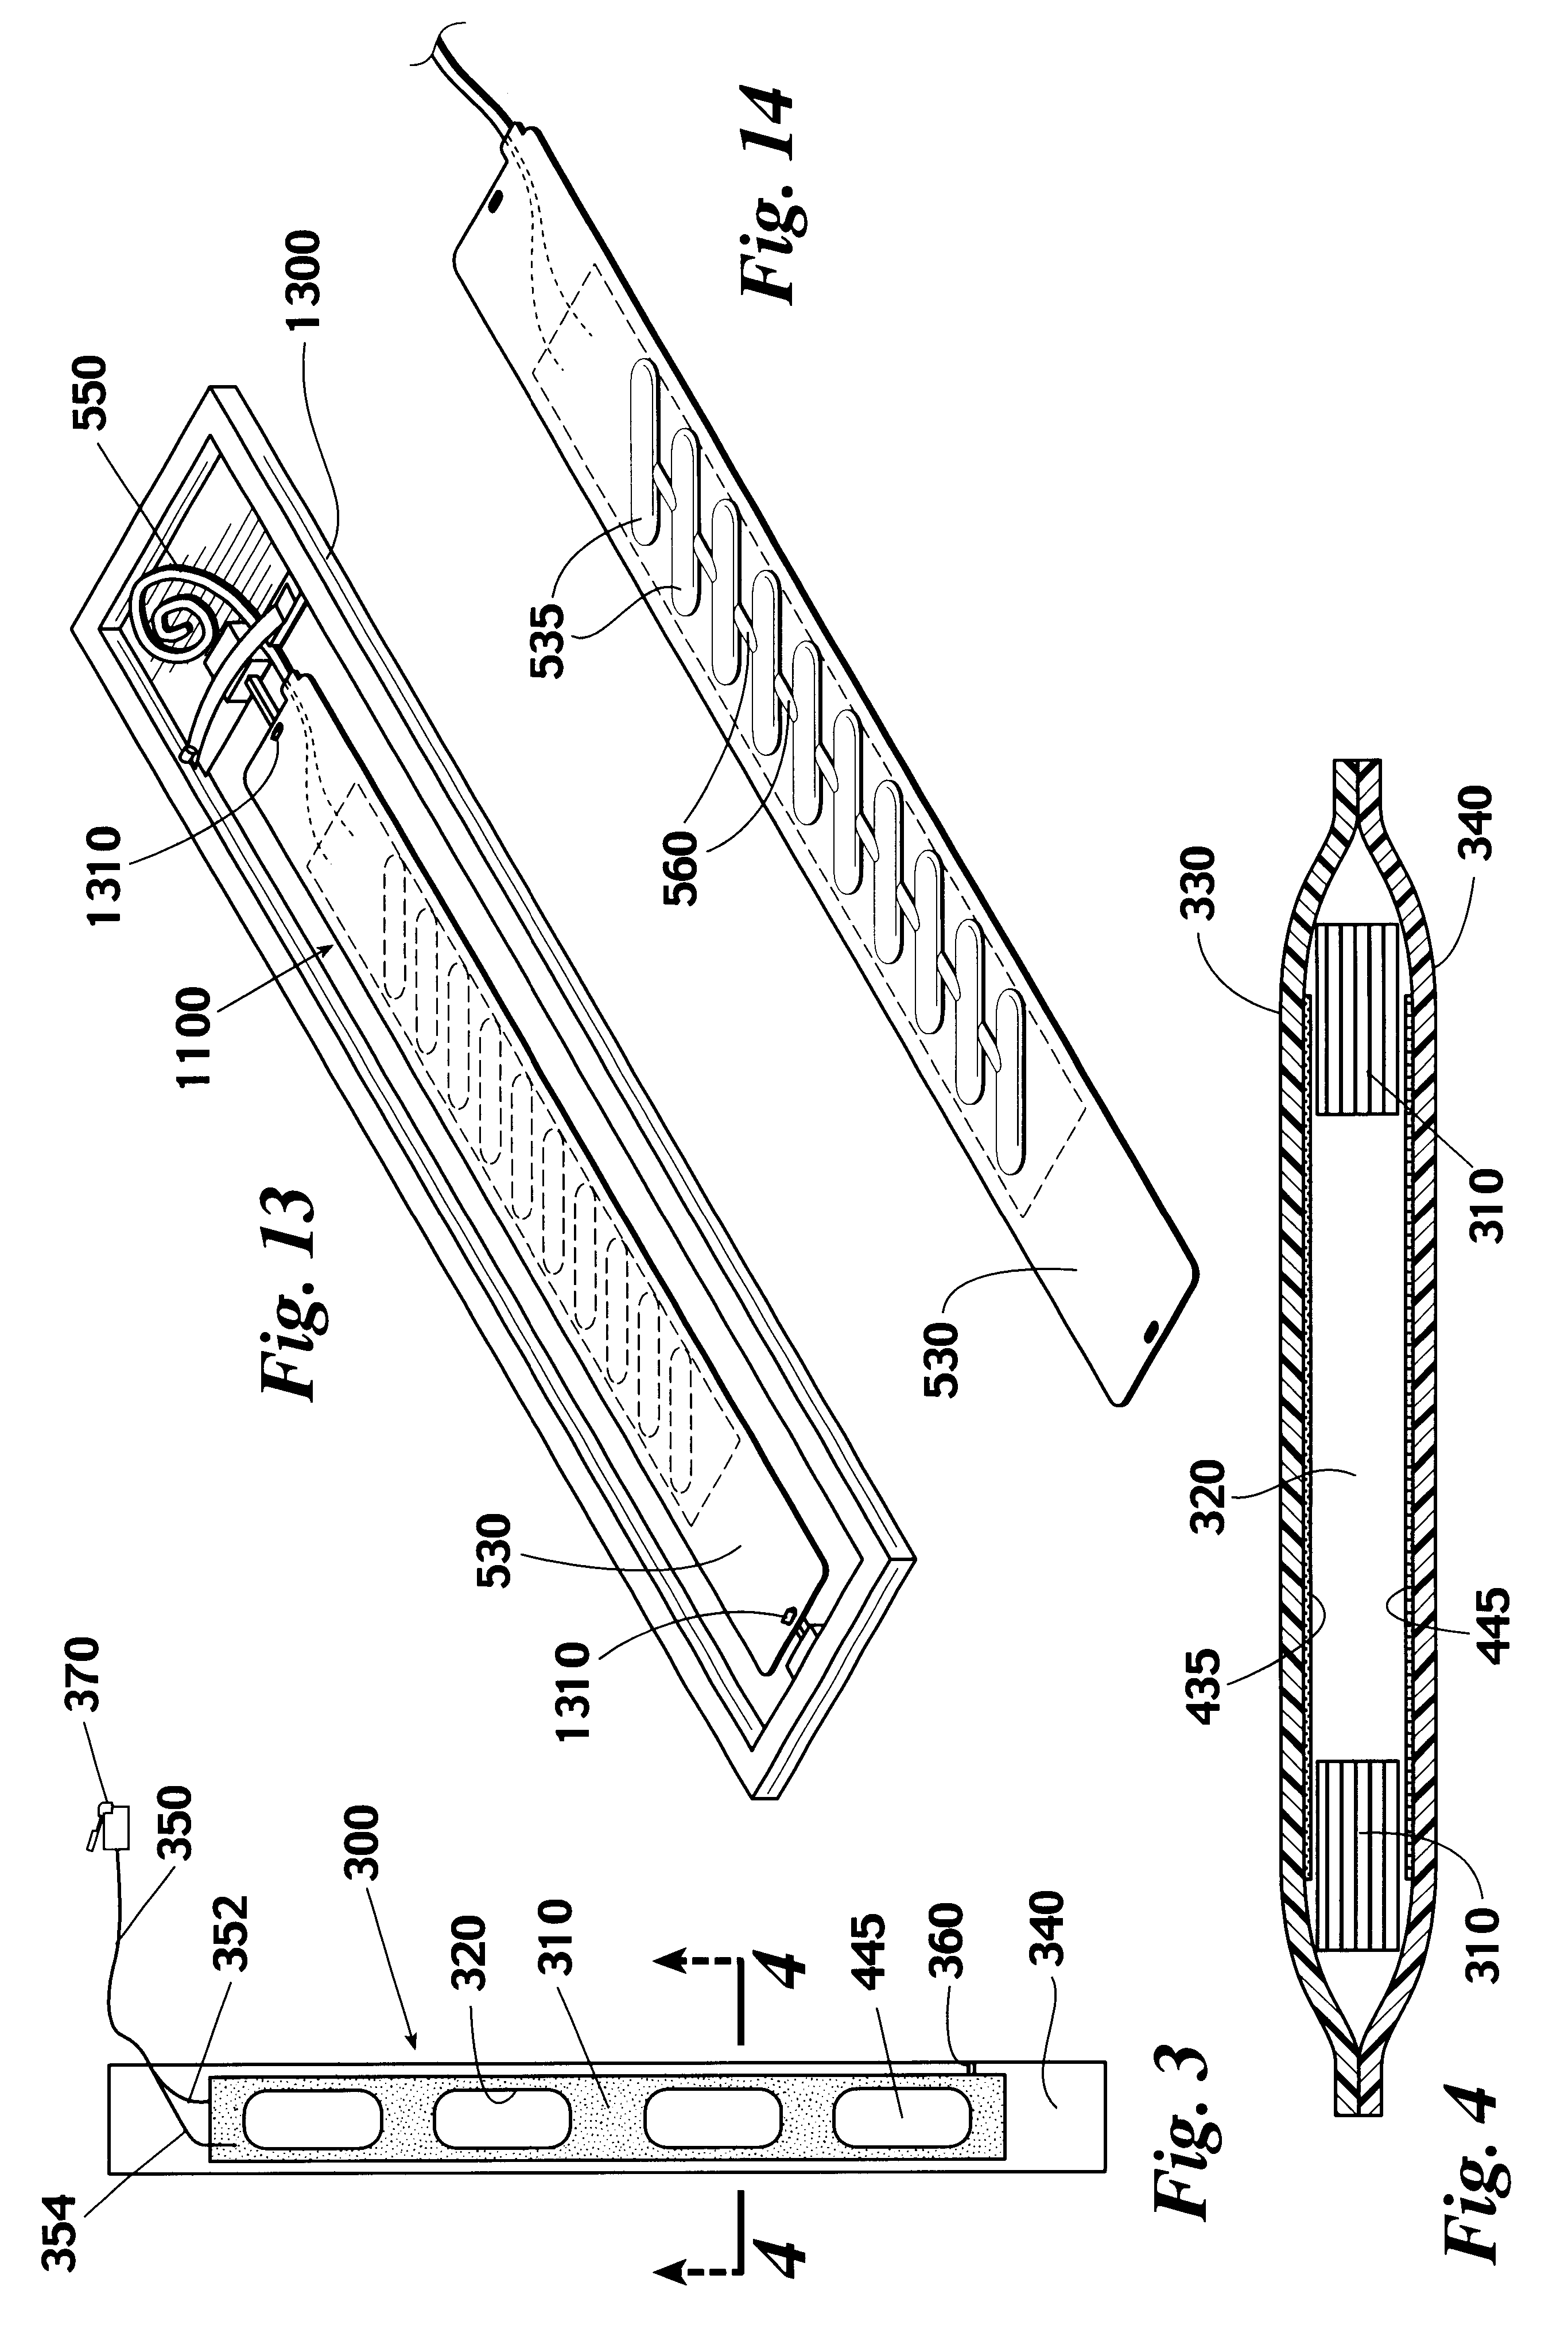 Binary switch apparatus and method for manufacturing same